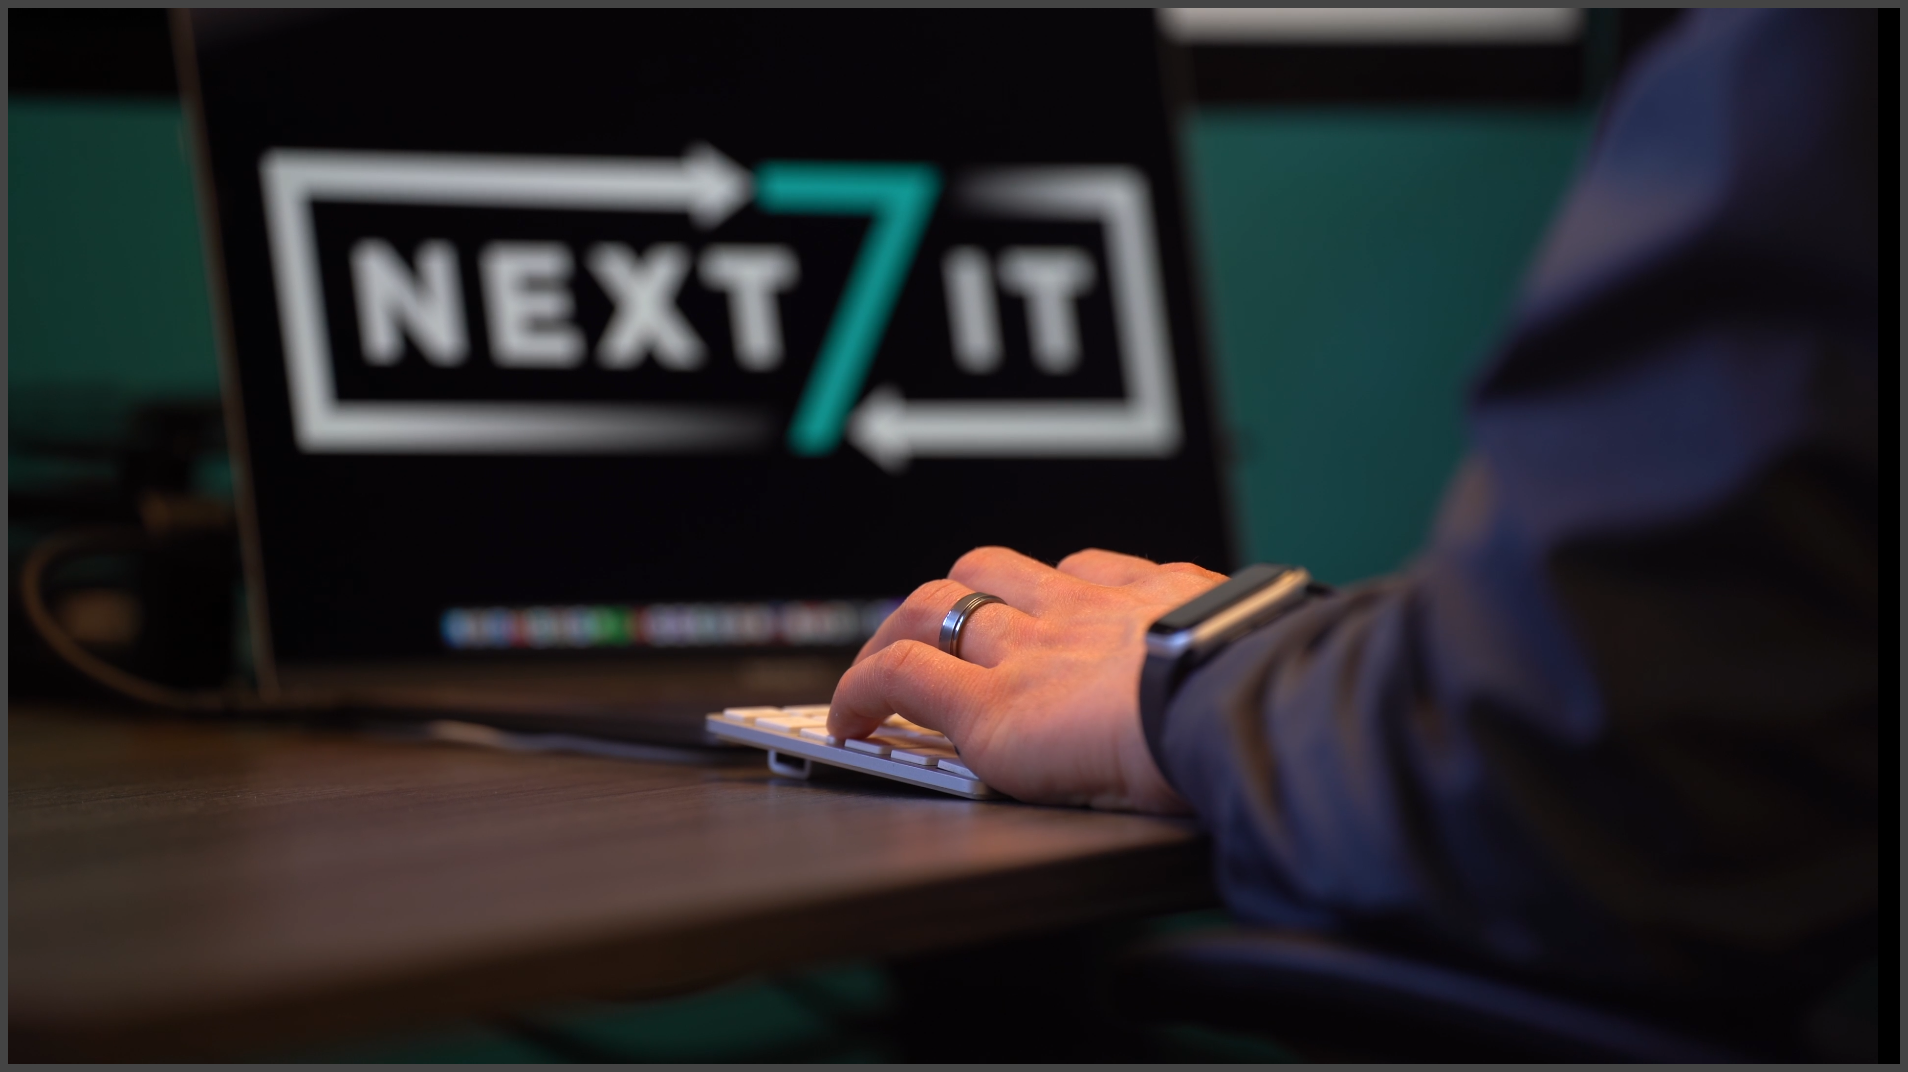 Next7 IT services technician assisting a small business client.